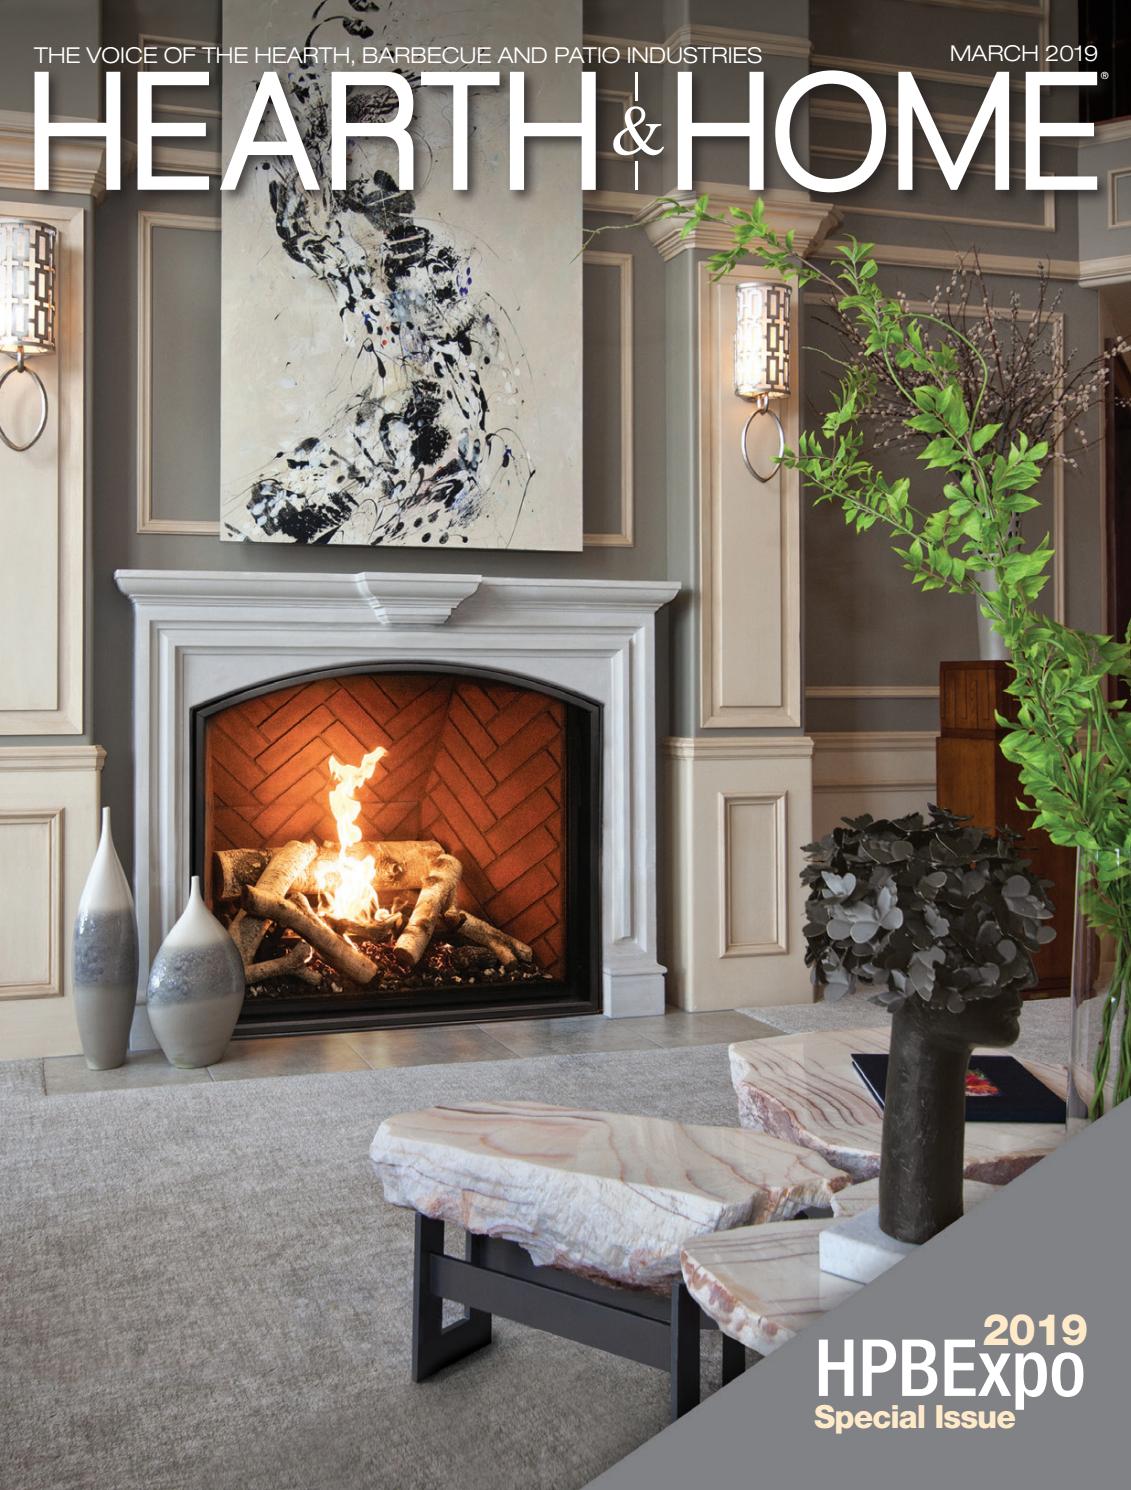 Gas Fireplace Electronic Ignition Troubleshooting Best Of Hearth & Home Magazine – 2019 March issue by Hearth & Home